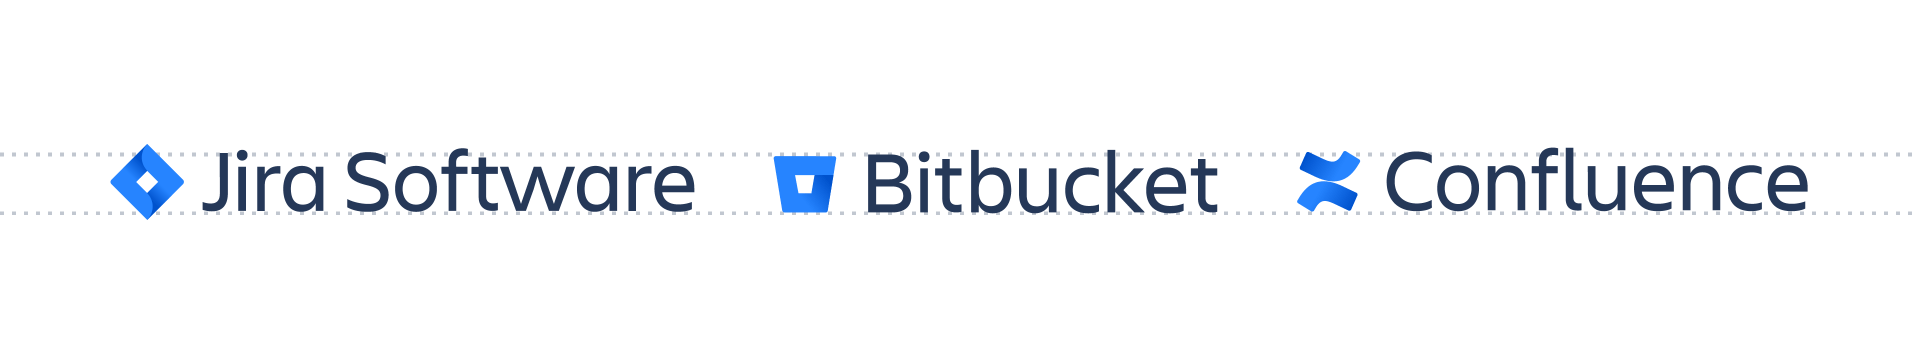 Product logo horizontal alignment for Jira Software, Bitbucket and Confluence.